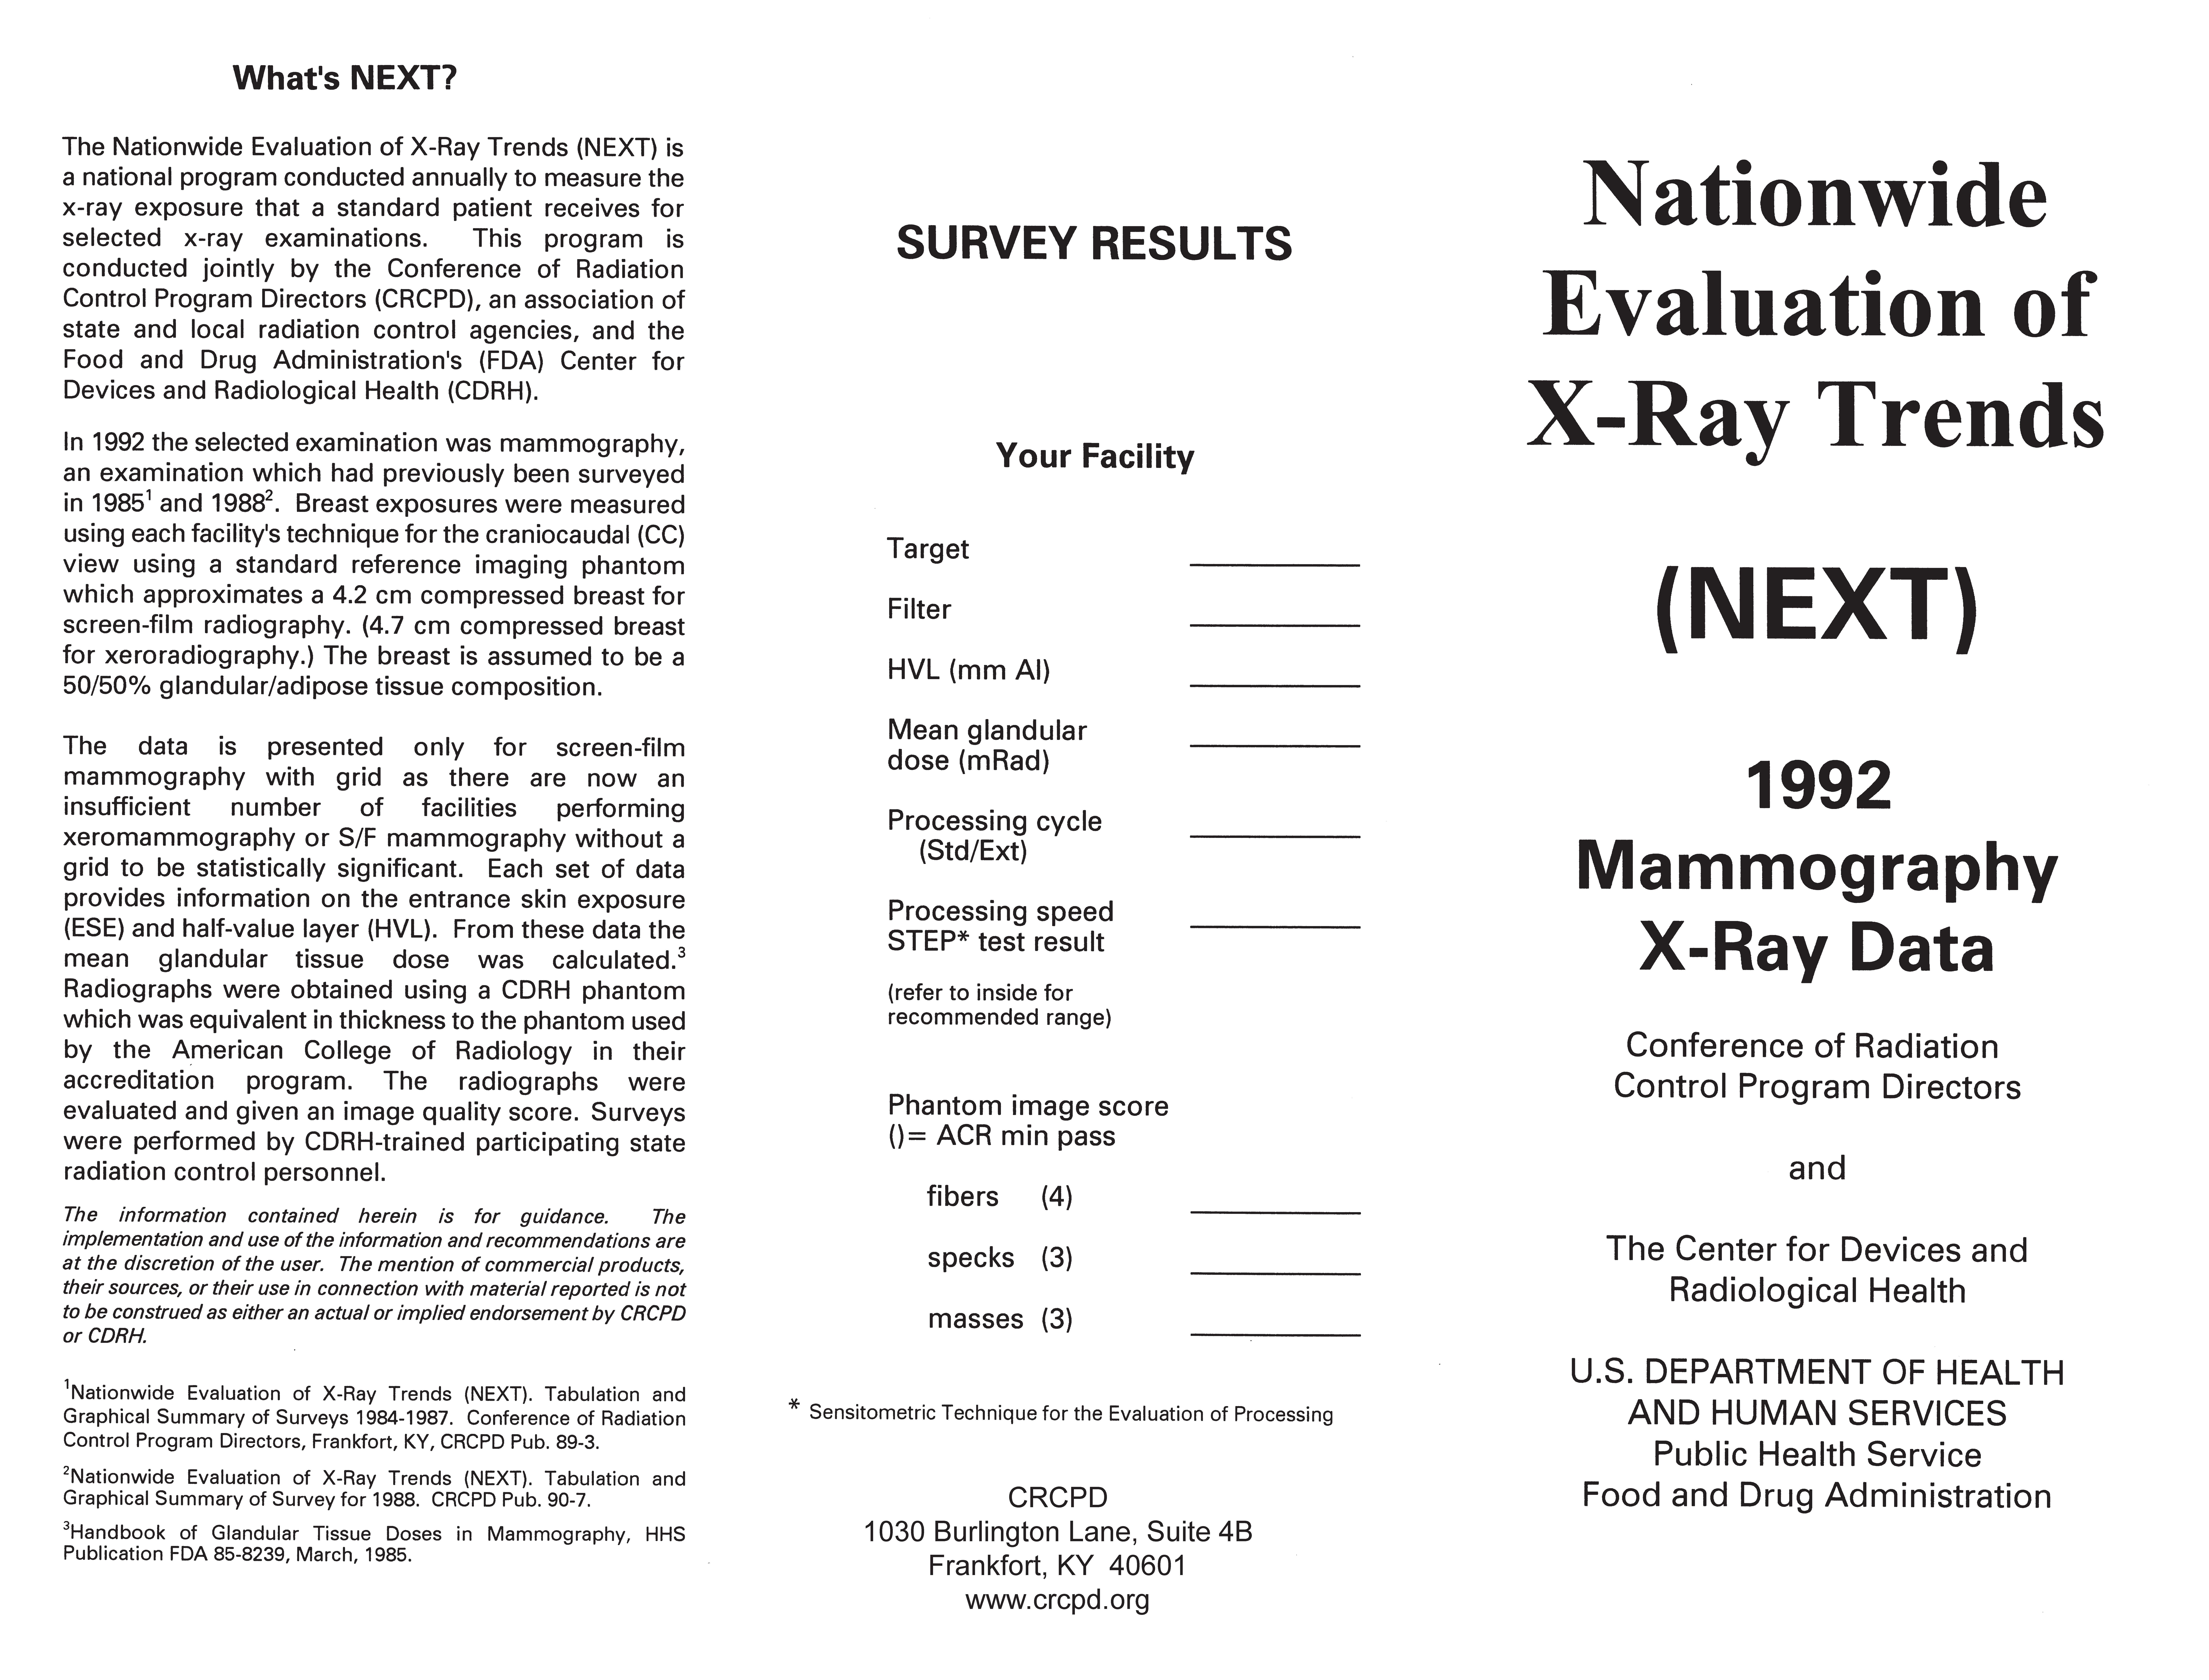 Nationwide Evaluation of X-Ray Trends (Next) 1992 Mammography X-Ray Data (trifold)